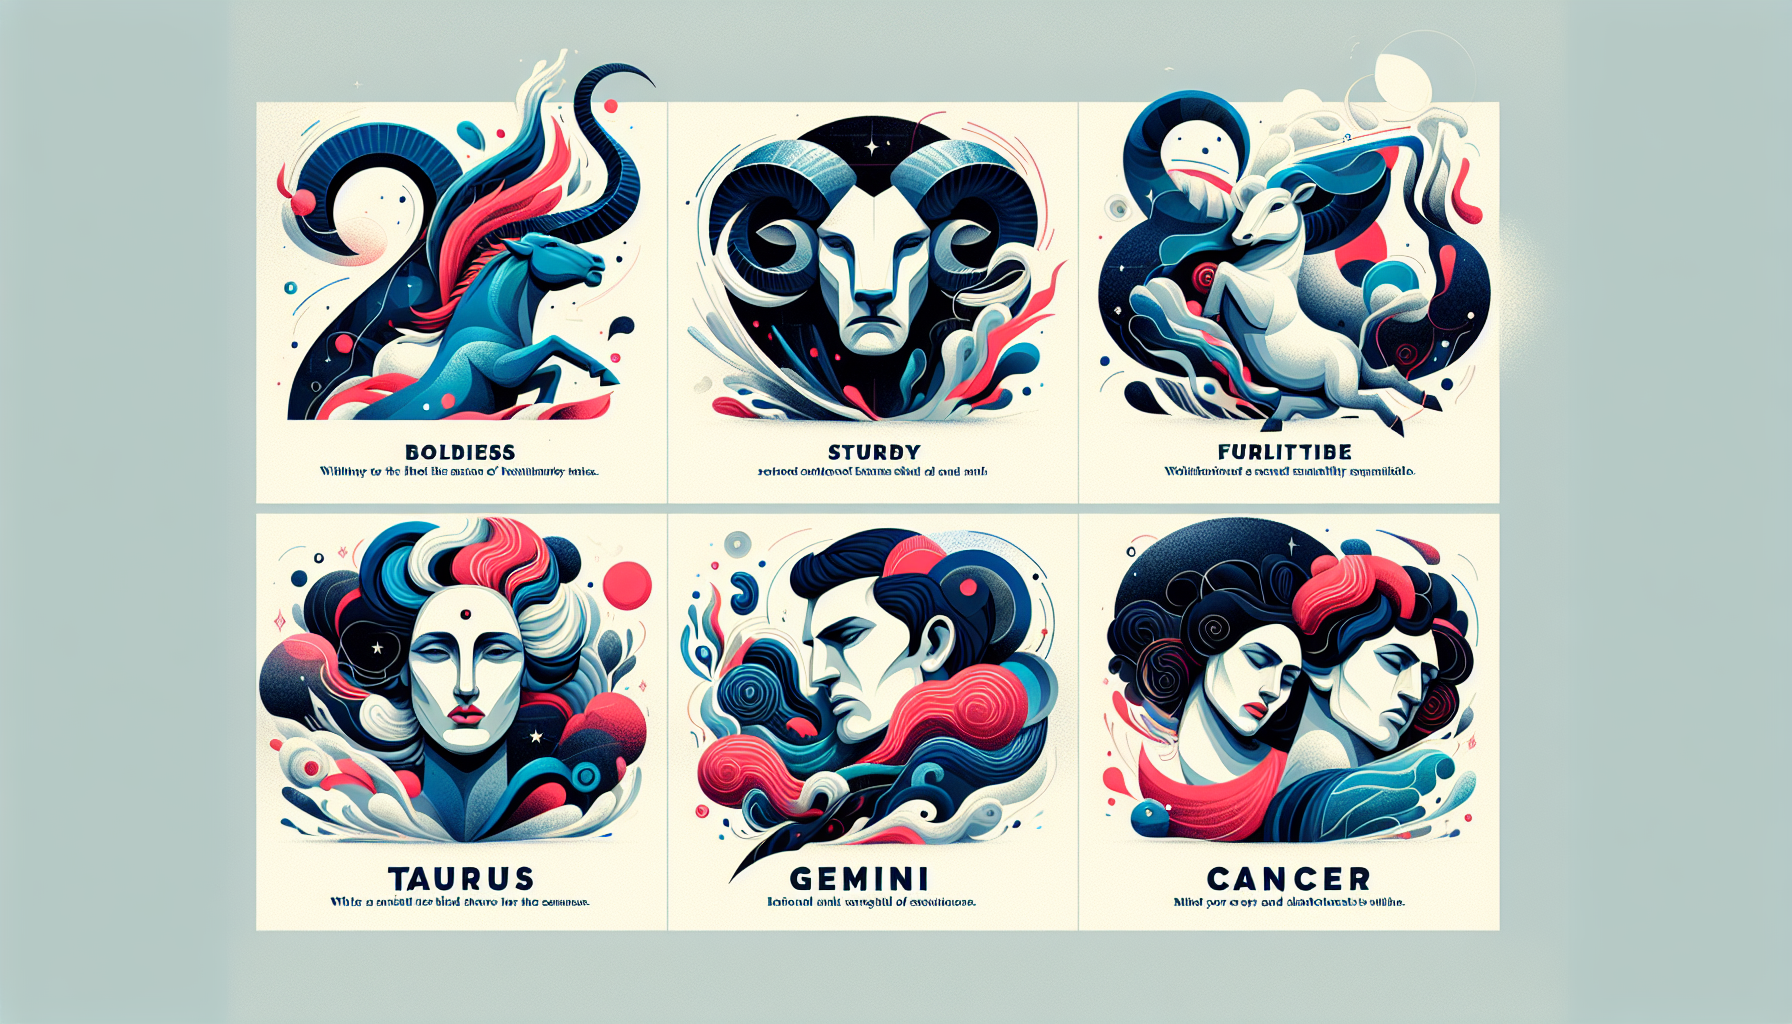 What Are The Personality Traits Of Each Zodiac Sign?